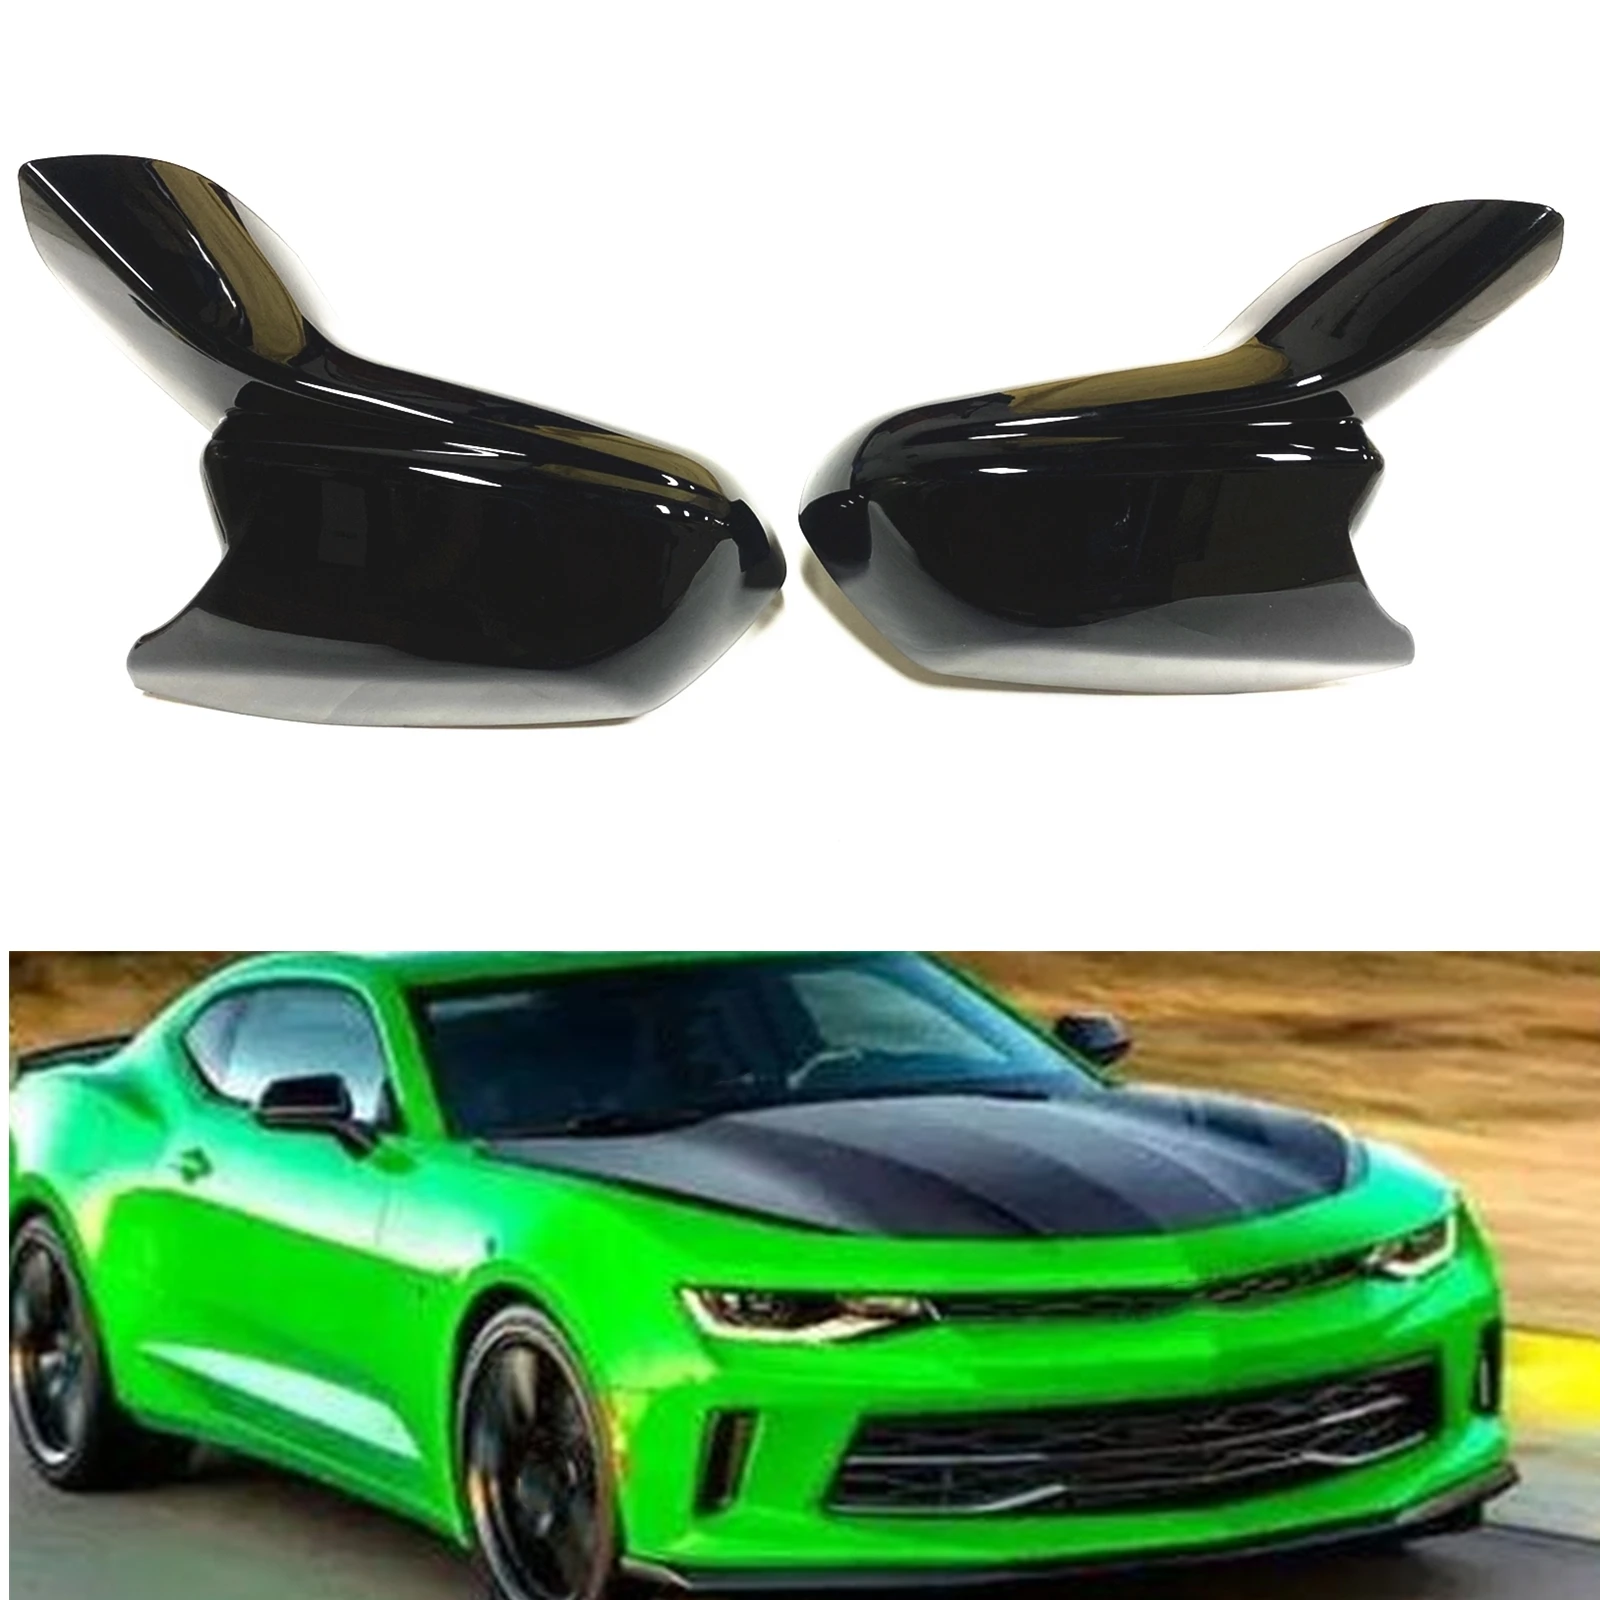 

For Chevrolet Chevy Camaro SS RS ZL1 LT 2016 2017 2018 2019 2020 2021 2022 Mirror Cover Gloss Black Exterior Cap Rearview Add On